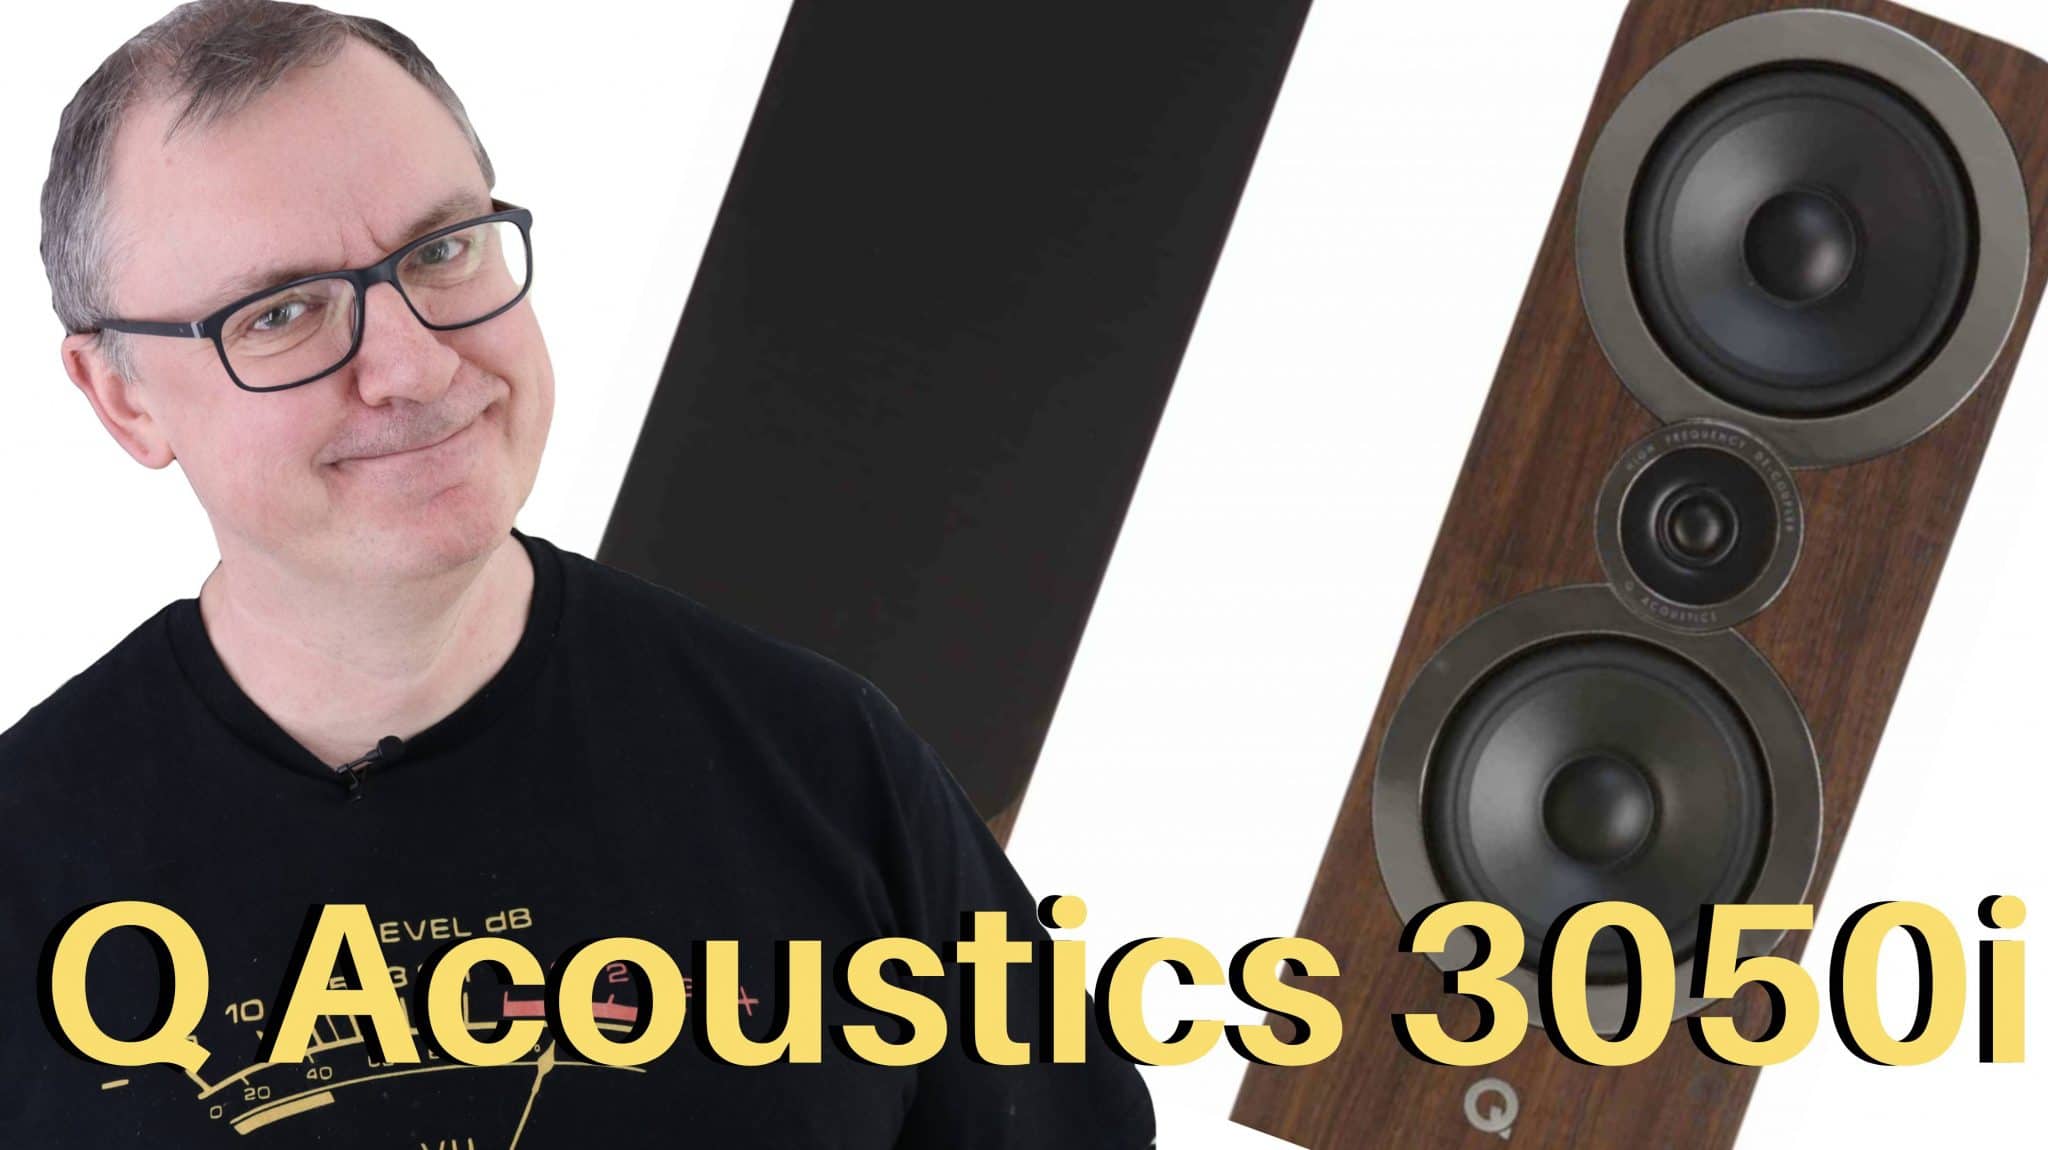 3050i Floorstanders From Q Acoustics - The Audiophile Man